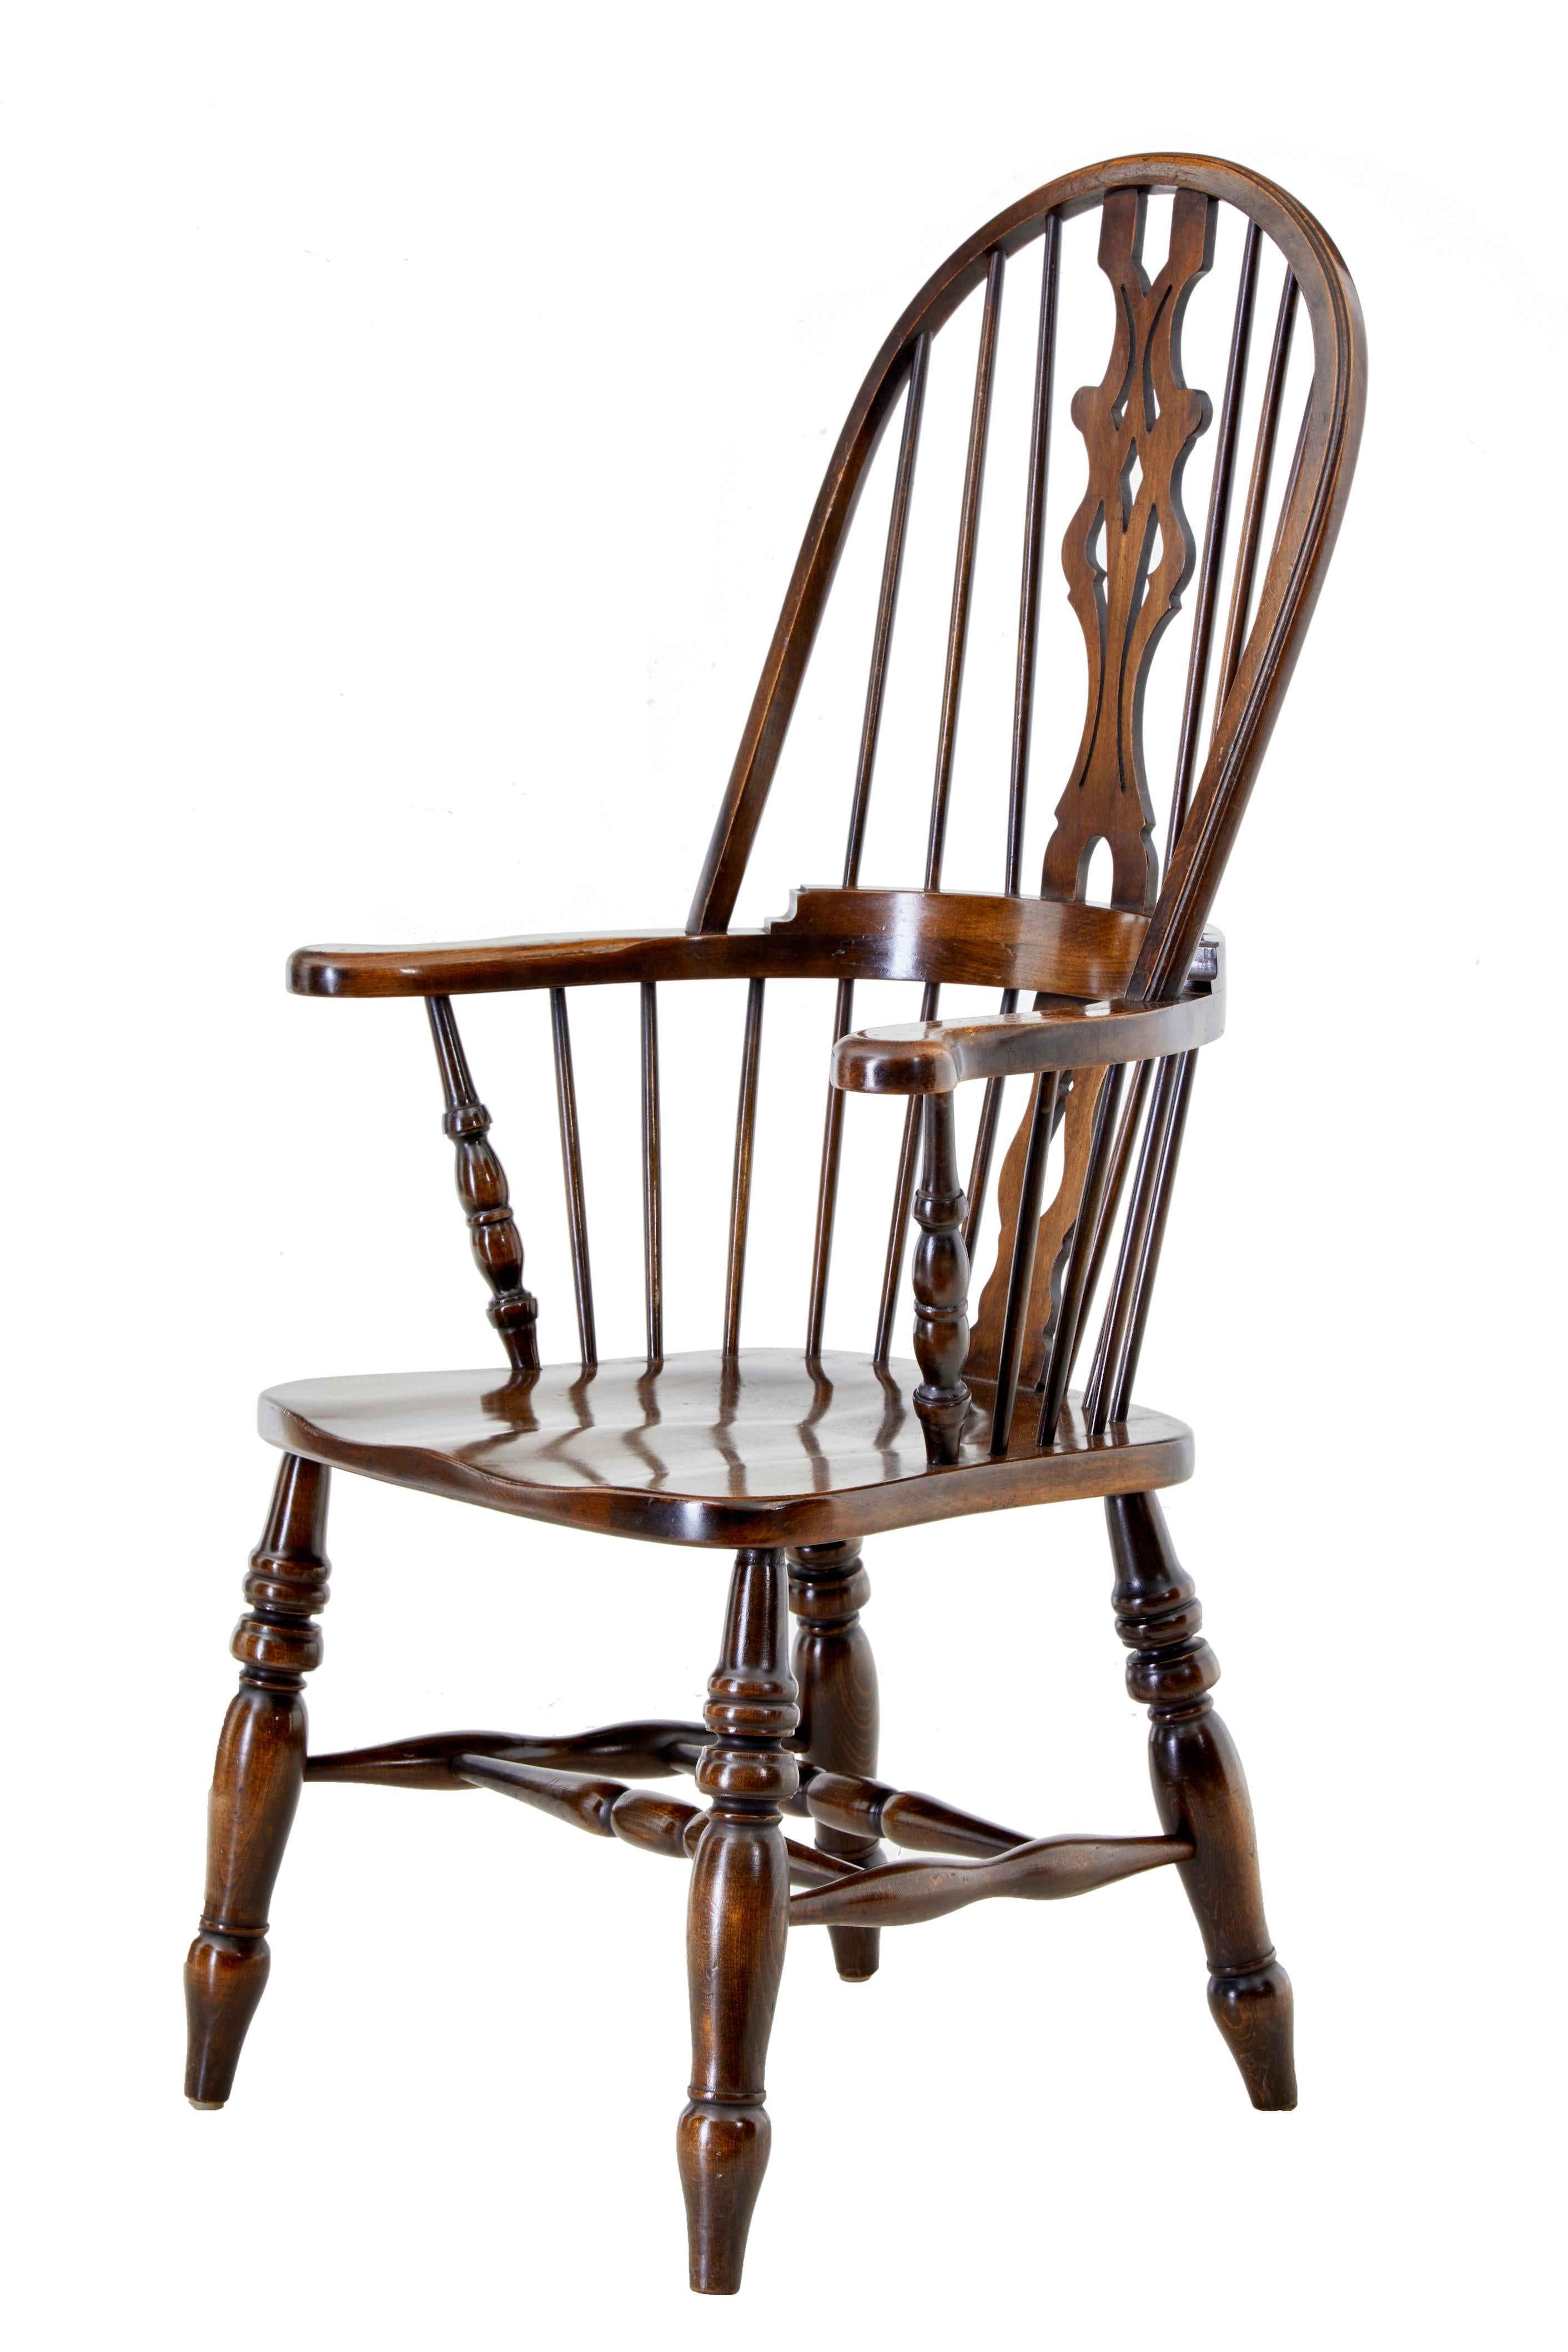 Set of 4 oak and elm Windsor armchairs by Bevan and Funnel, circa 1970.

Fine quality reproductions of a well known design by Bevan & funnel. Shaped back rests with turned spindles and fret backrest. Shepards crook shaped arm, standing on 4 turned